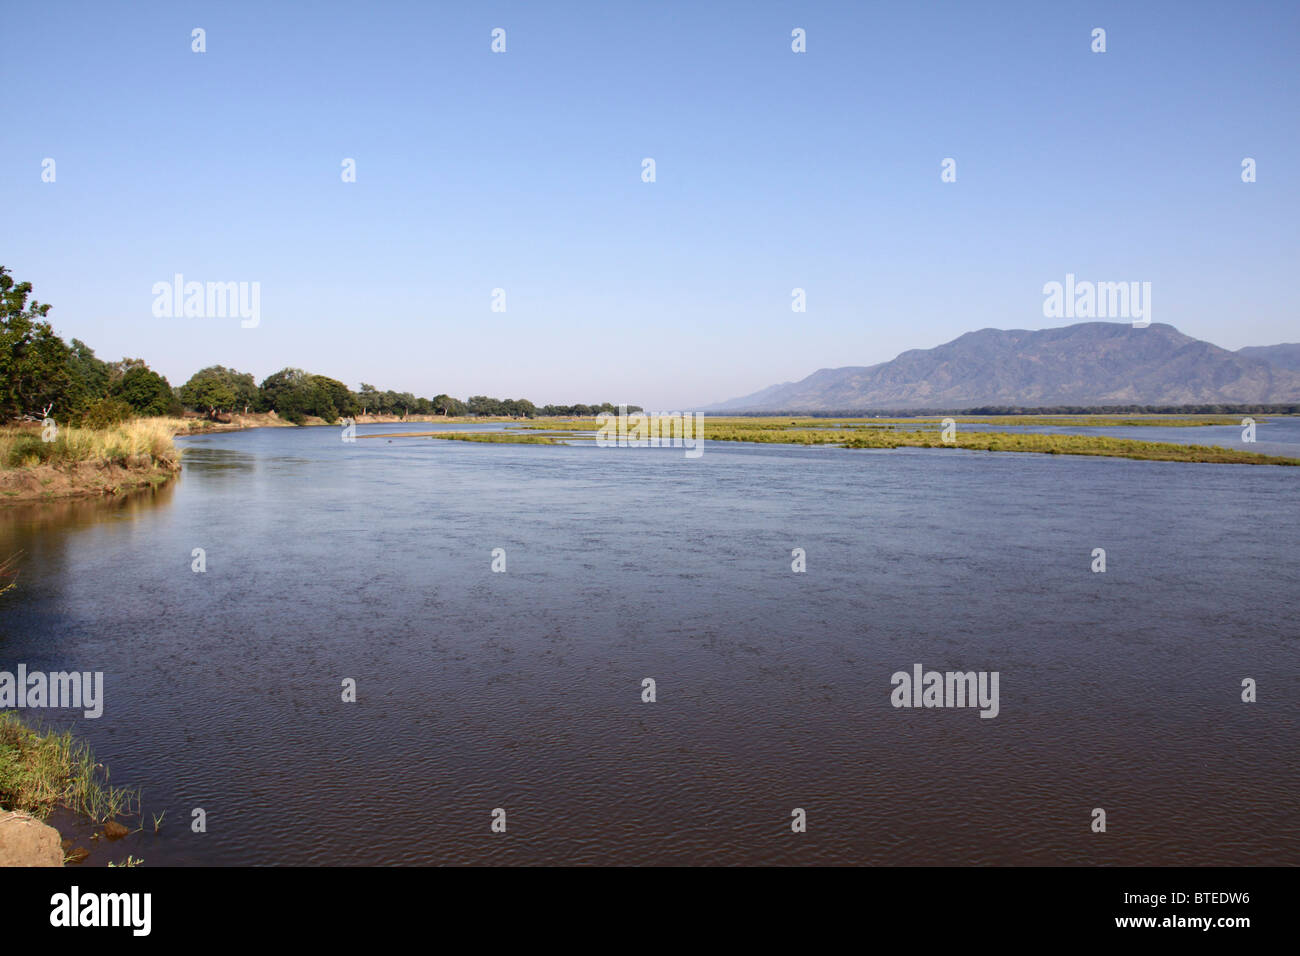 Zambezi river with mountains in the background Stock Photo